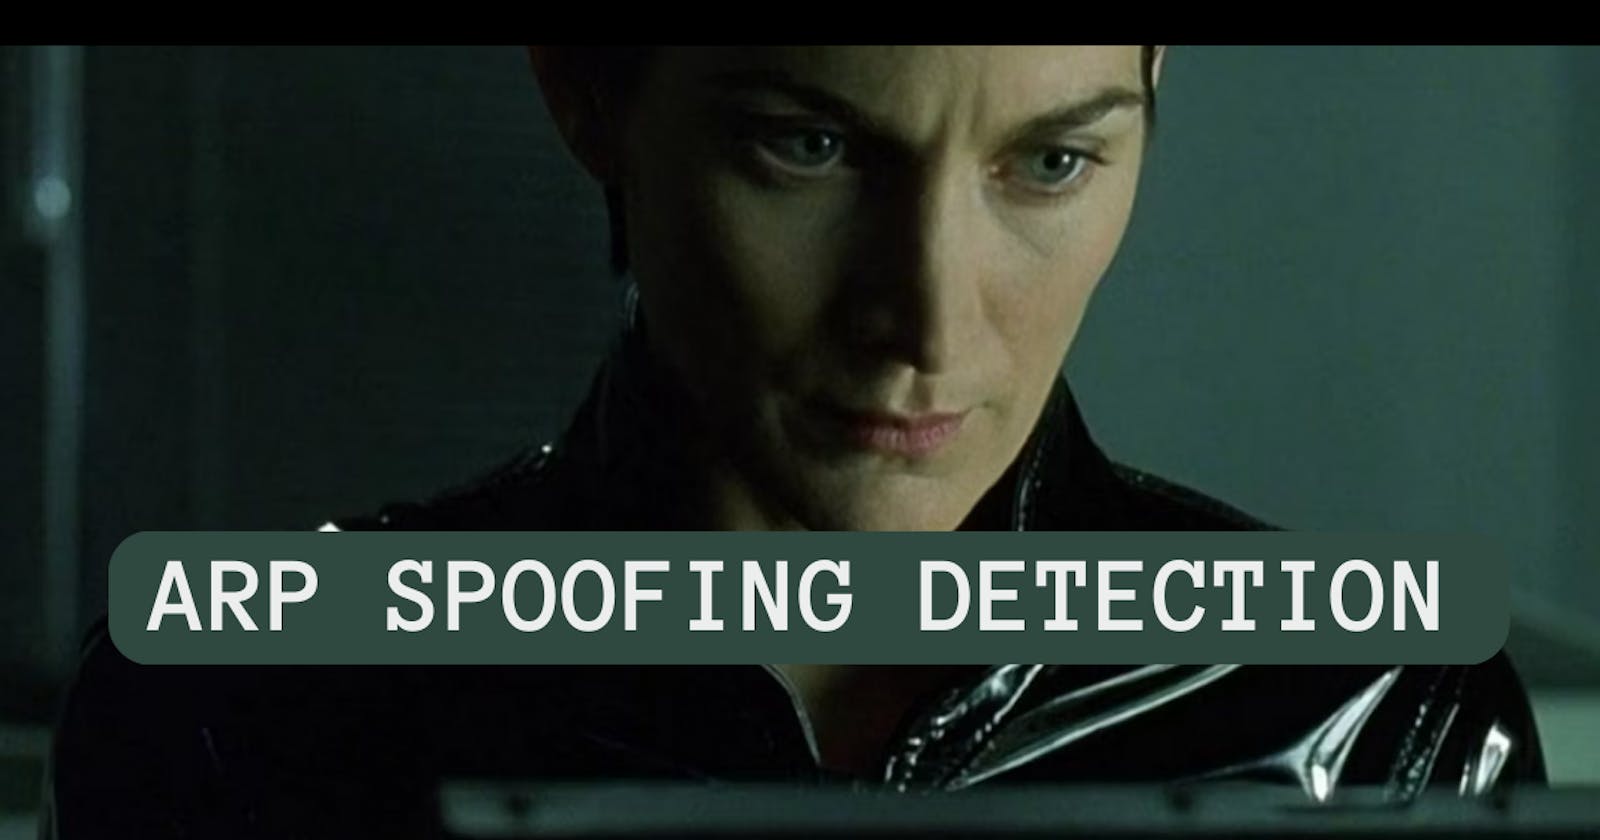 Detect ARP spoofing quickly & increase network security